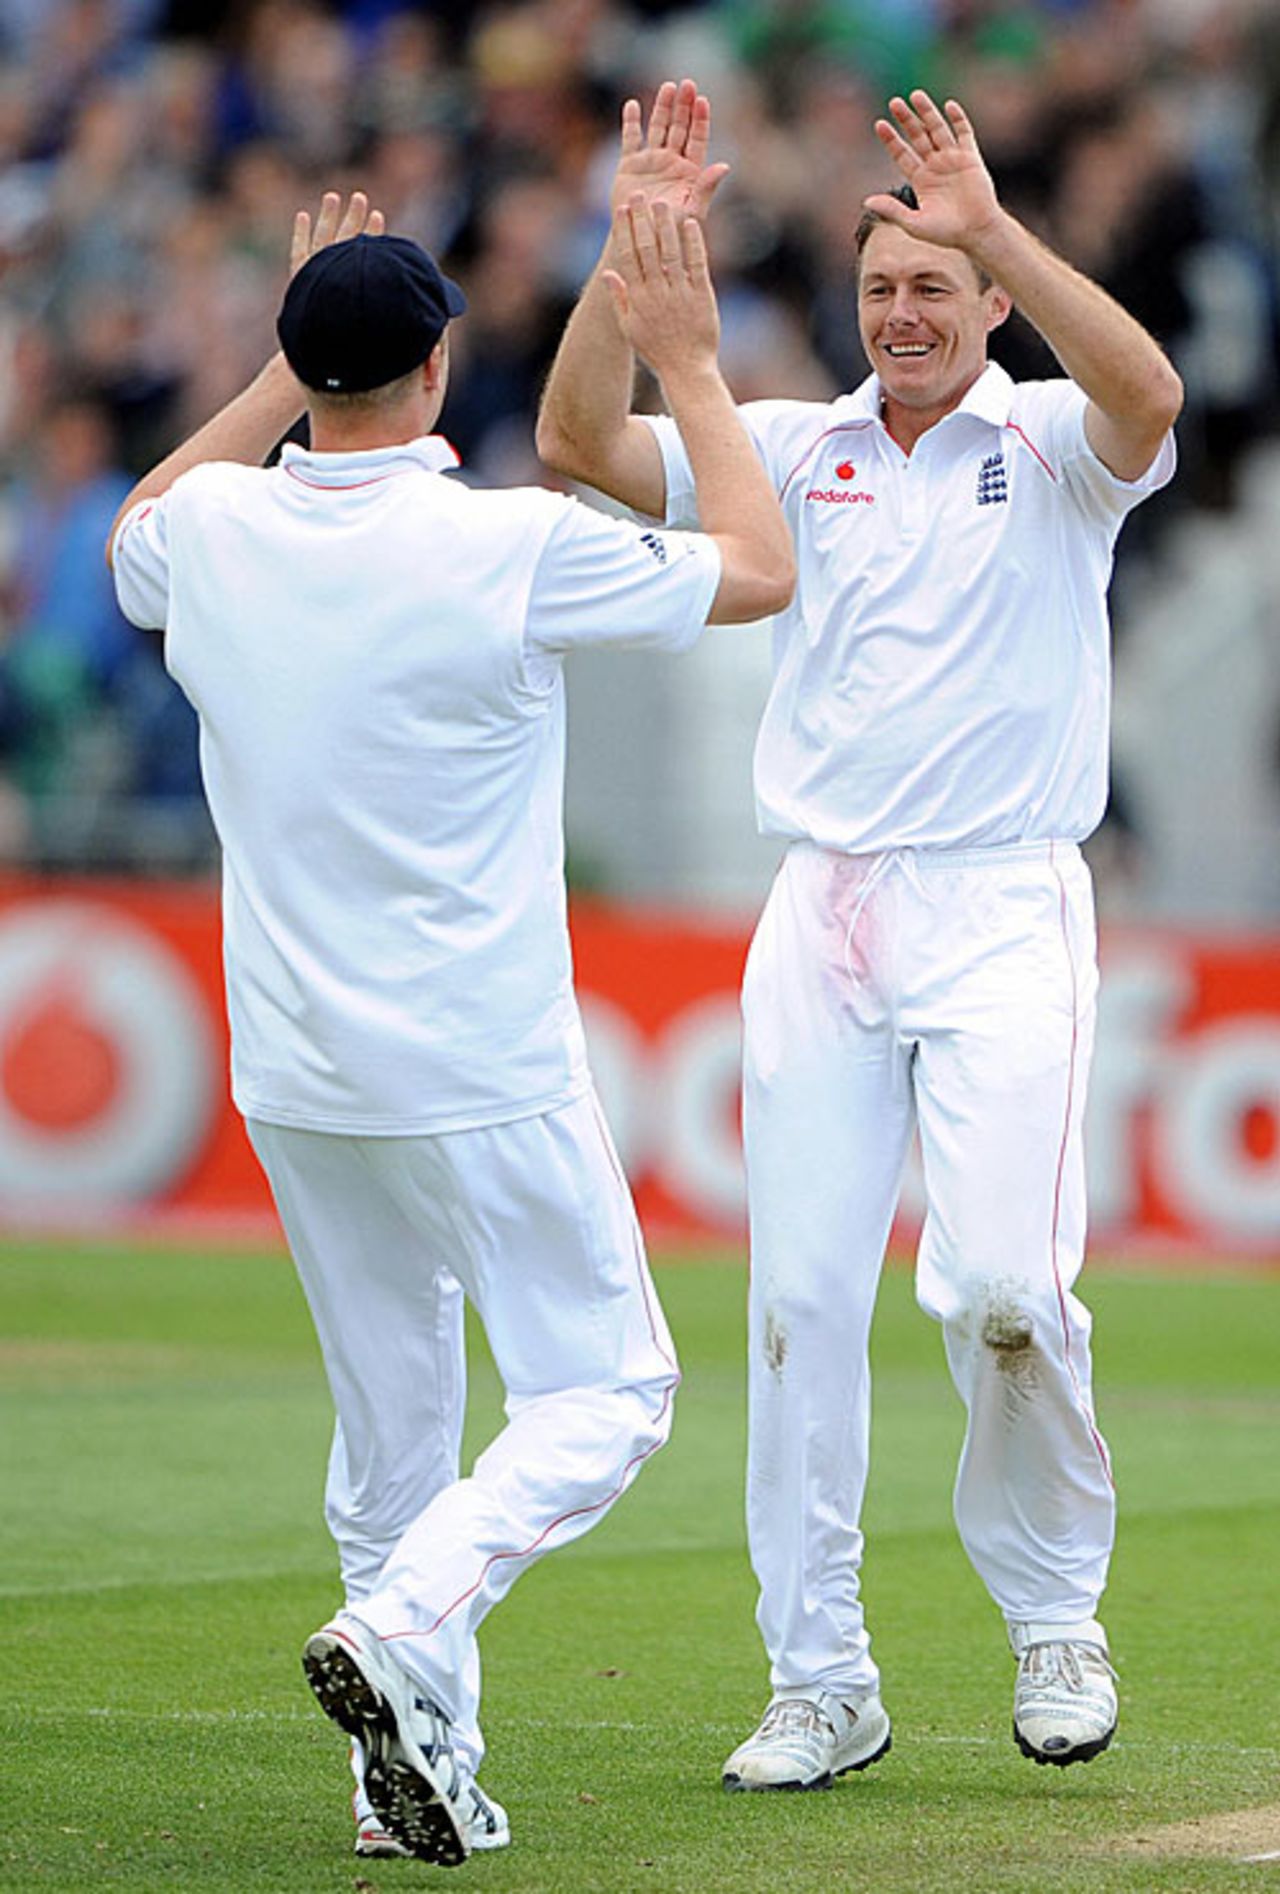 Andrew Flintoff congratulates Darren Pattinson on removing Ashwell Prince for 149, England v South Africa, 2nd Test, Headingley, July 20, 2008